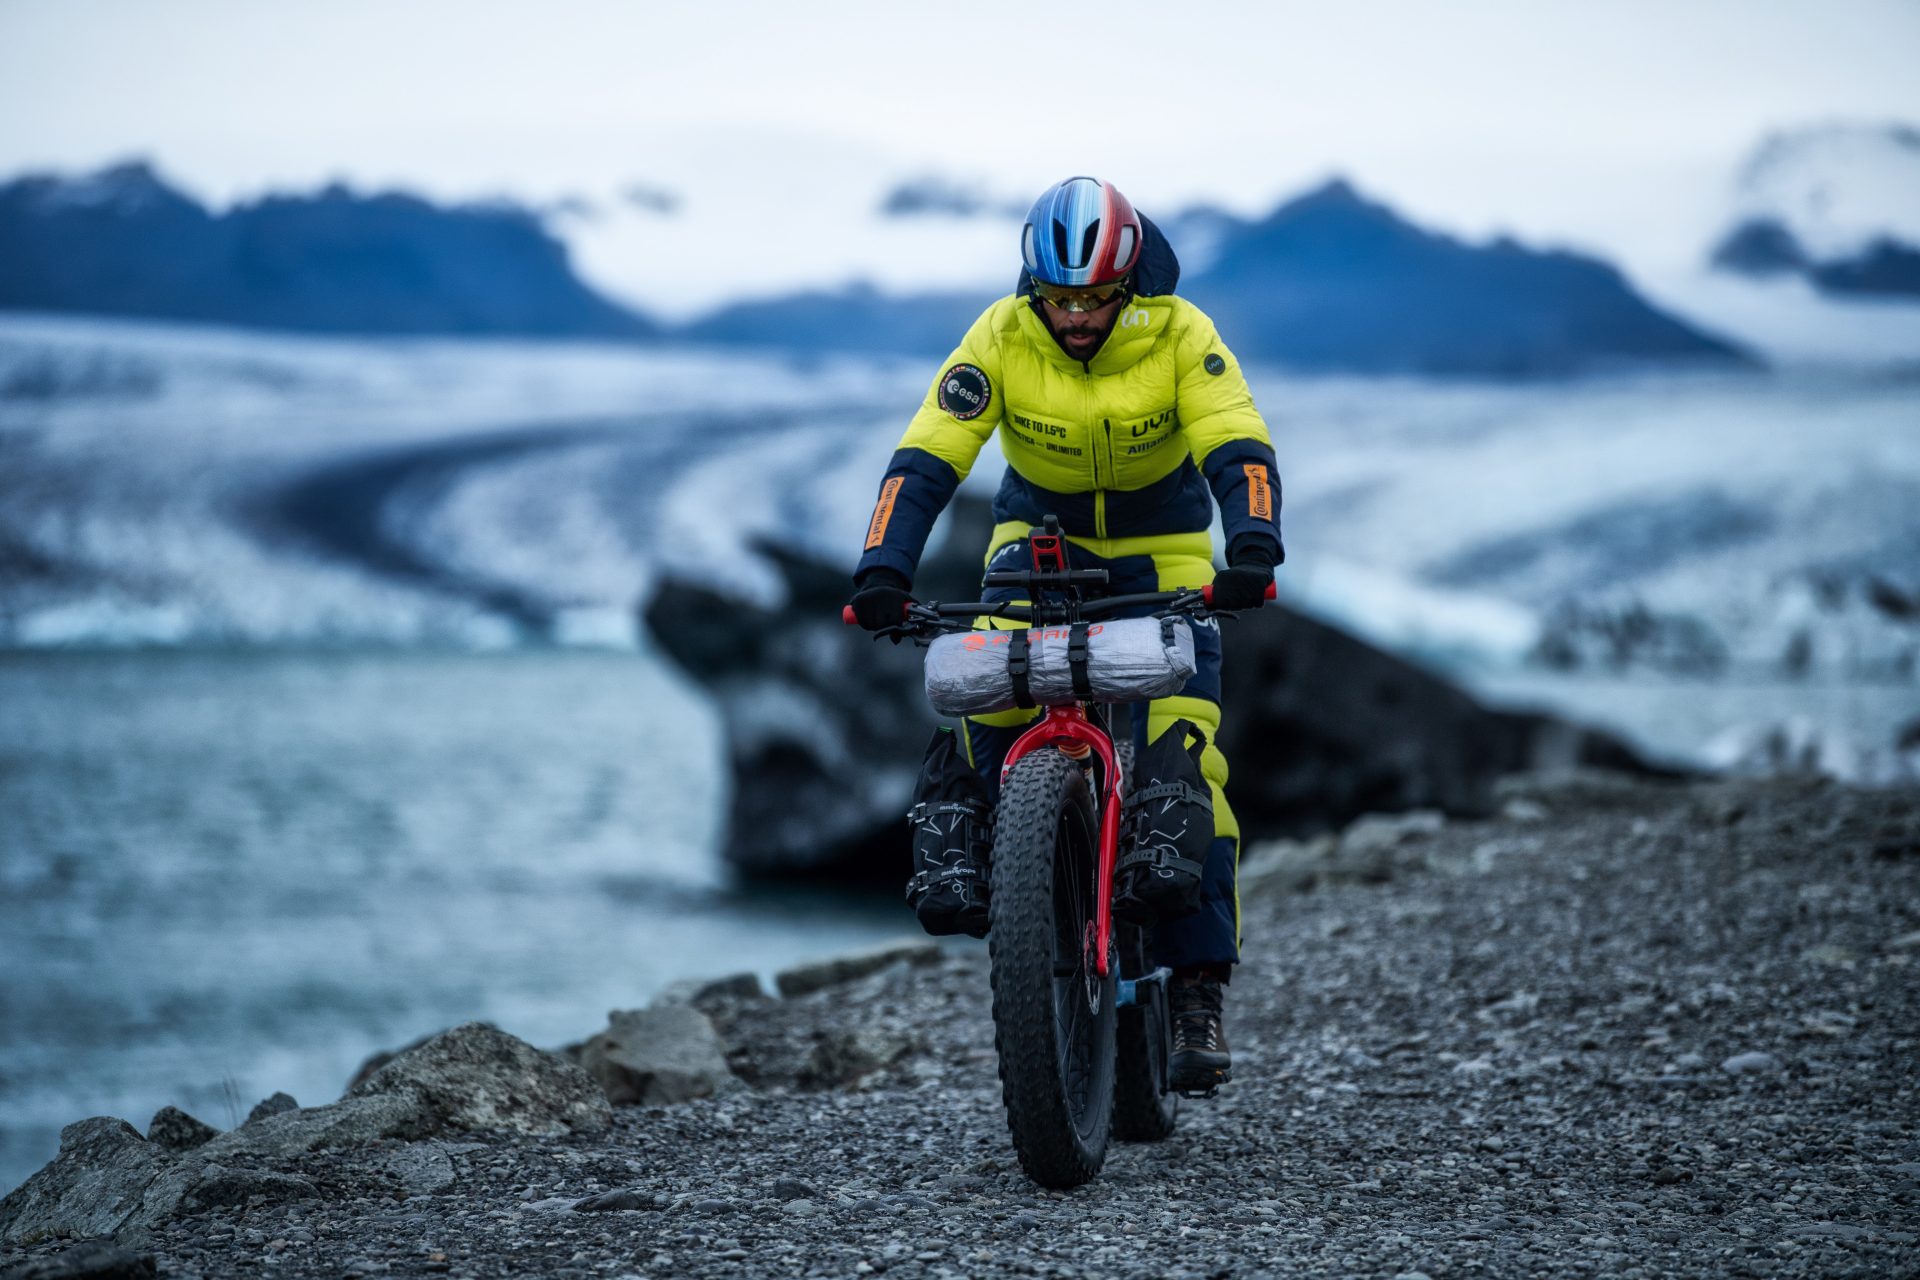 Omar Di Felice rides across a rugged, snowy landscape. He's on bare rock, but there's ice and snow all around and he's dressed warmly in a yellow down jacket. The bike is loaded with supplies.